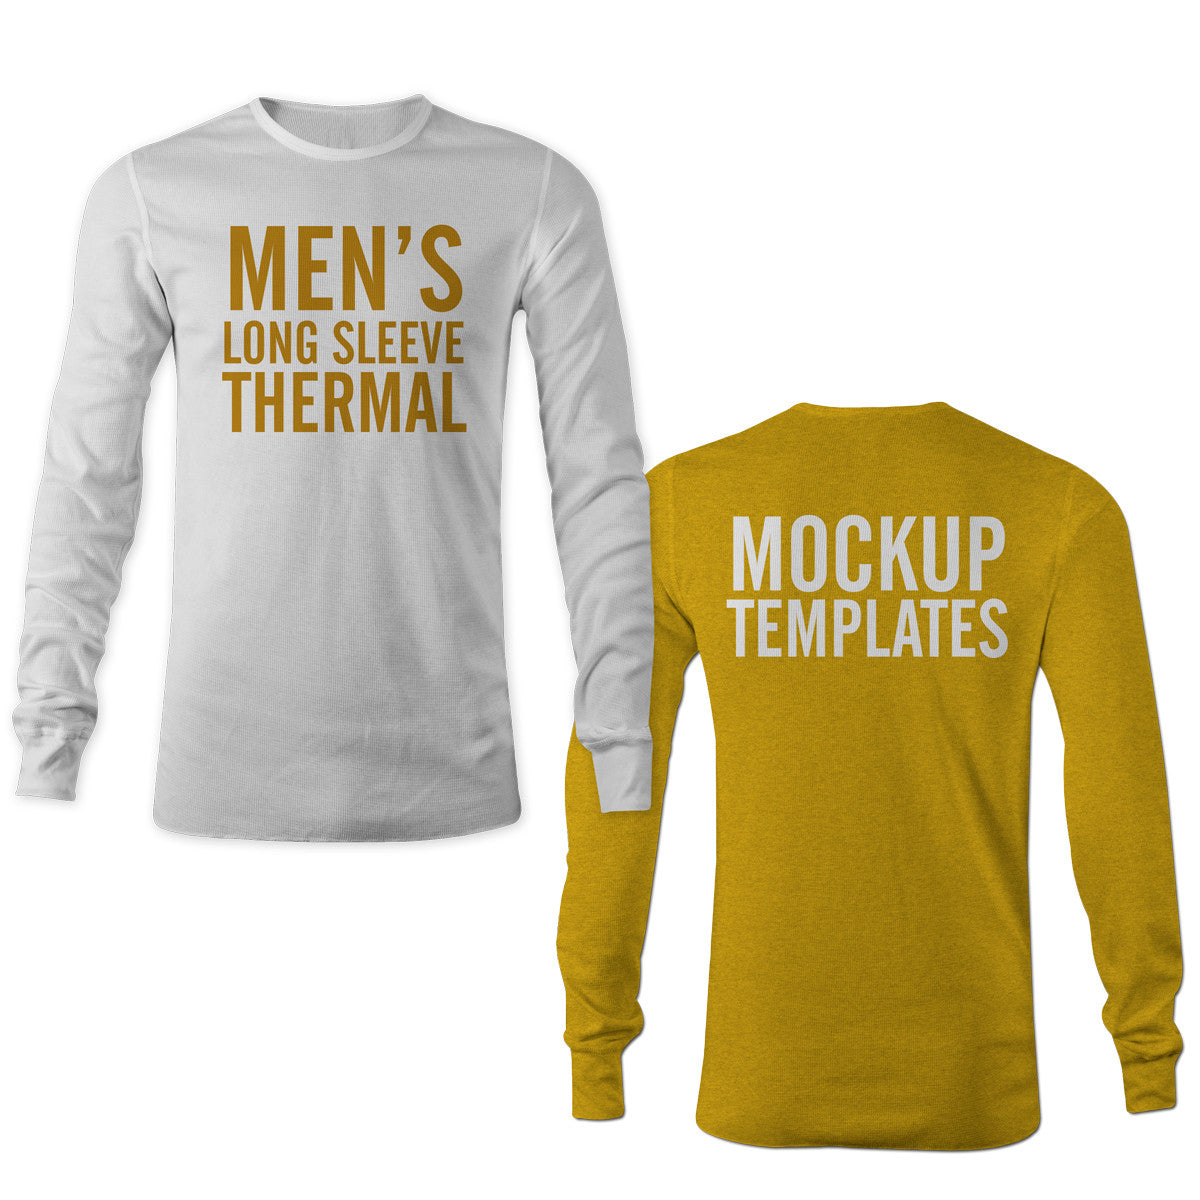 Men's Thermal Mockup Templates - TheVectorLab